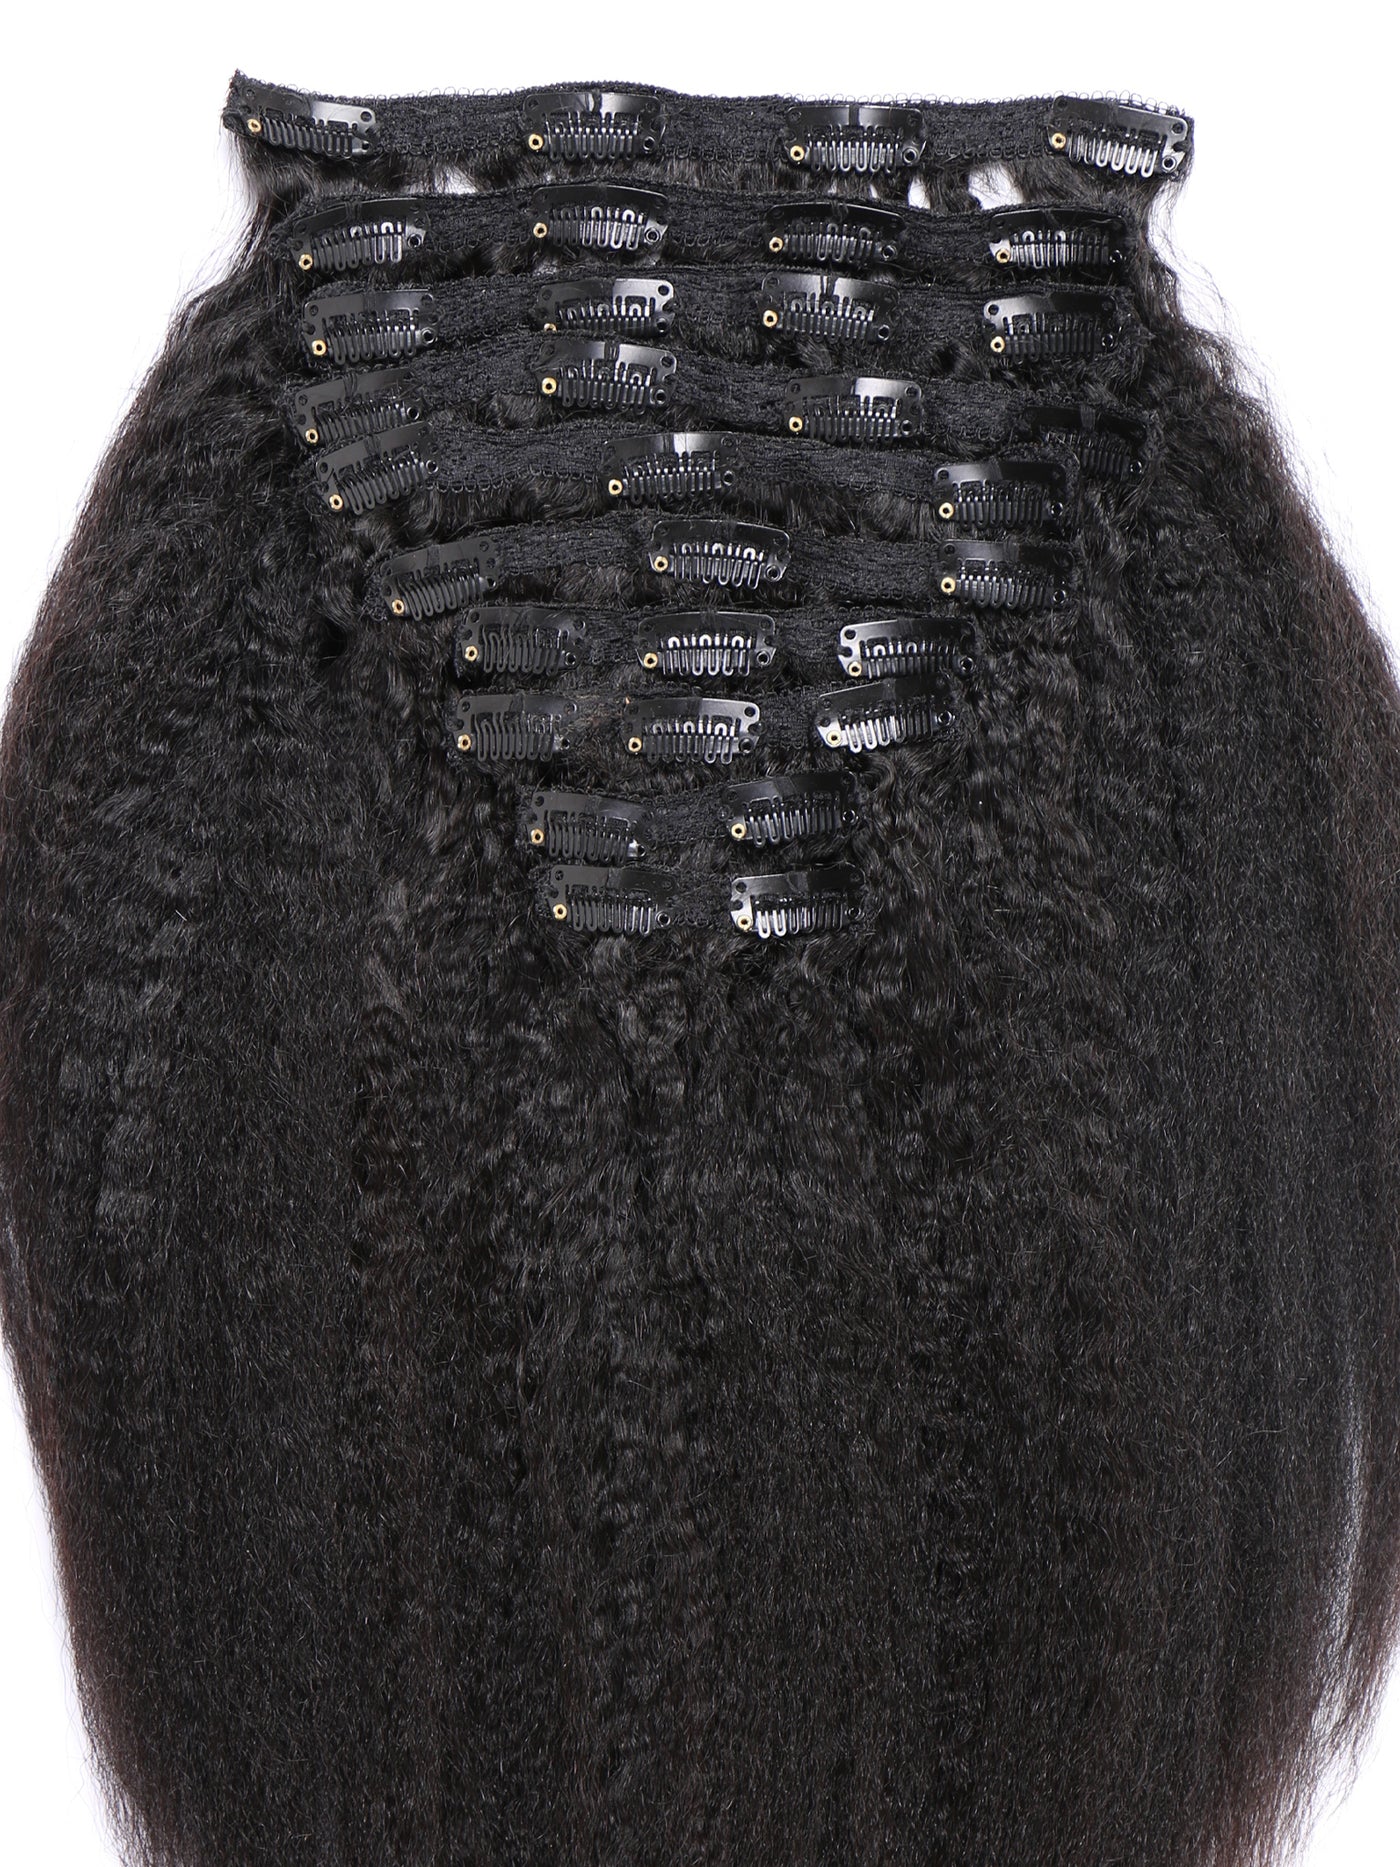 Indique Clip-In Human Hair Extensions Weft Hair